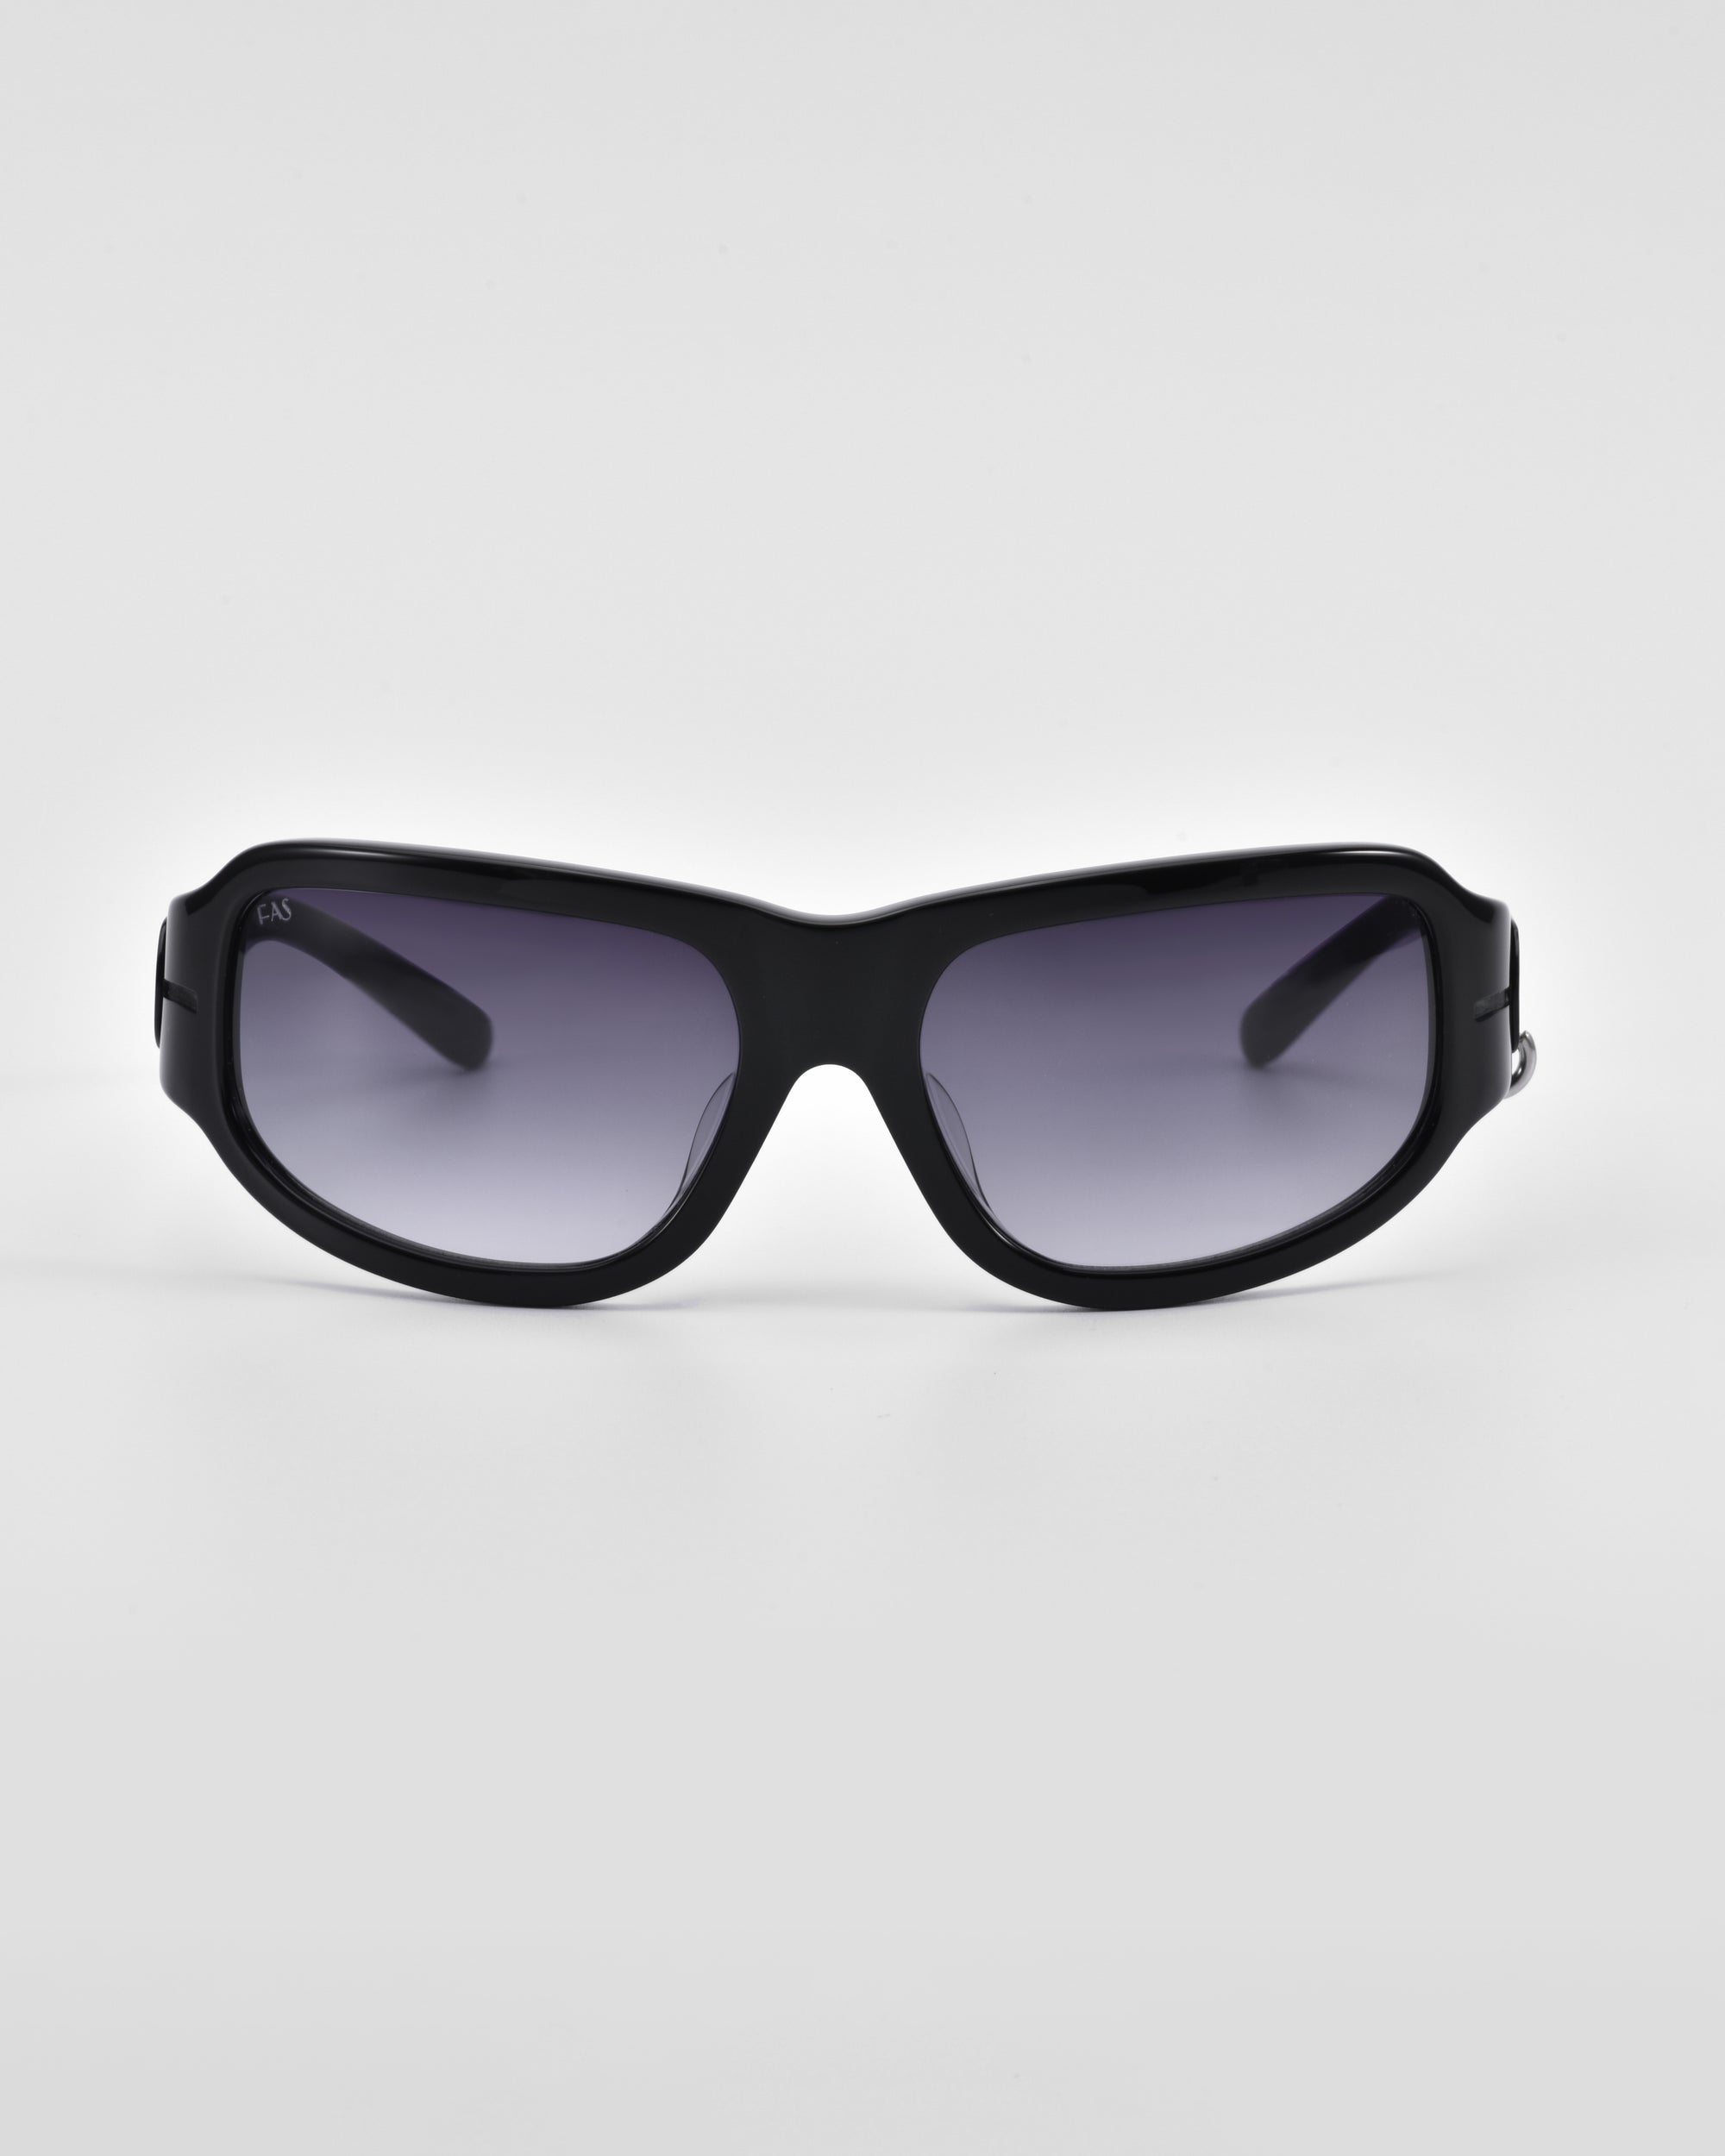 A pair of black For Art's Sake® Raven sunglasses with dark tinted lenses is centered against a plain white background. The frames are slightly curved with a sleek design, and the temples are thick and straight, reminiscent of the Y2K wrap sunglasses trend.